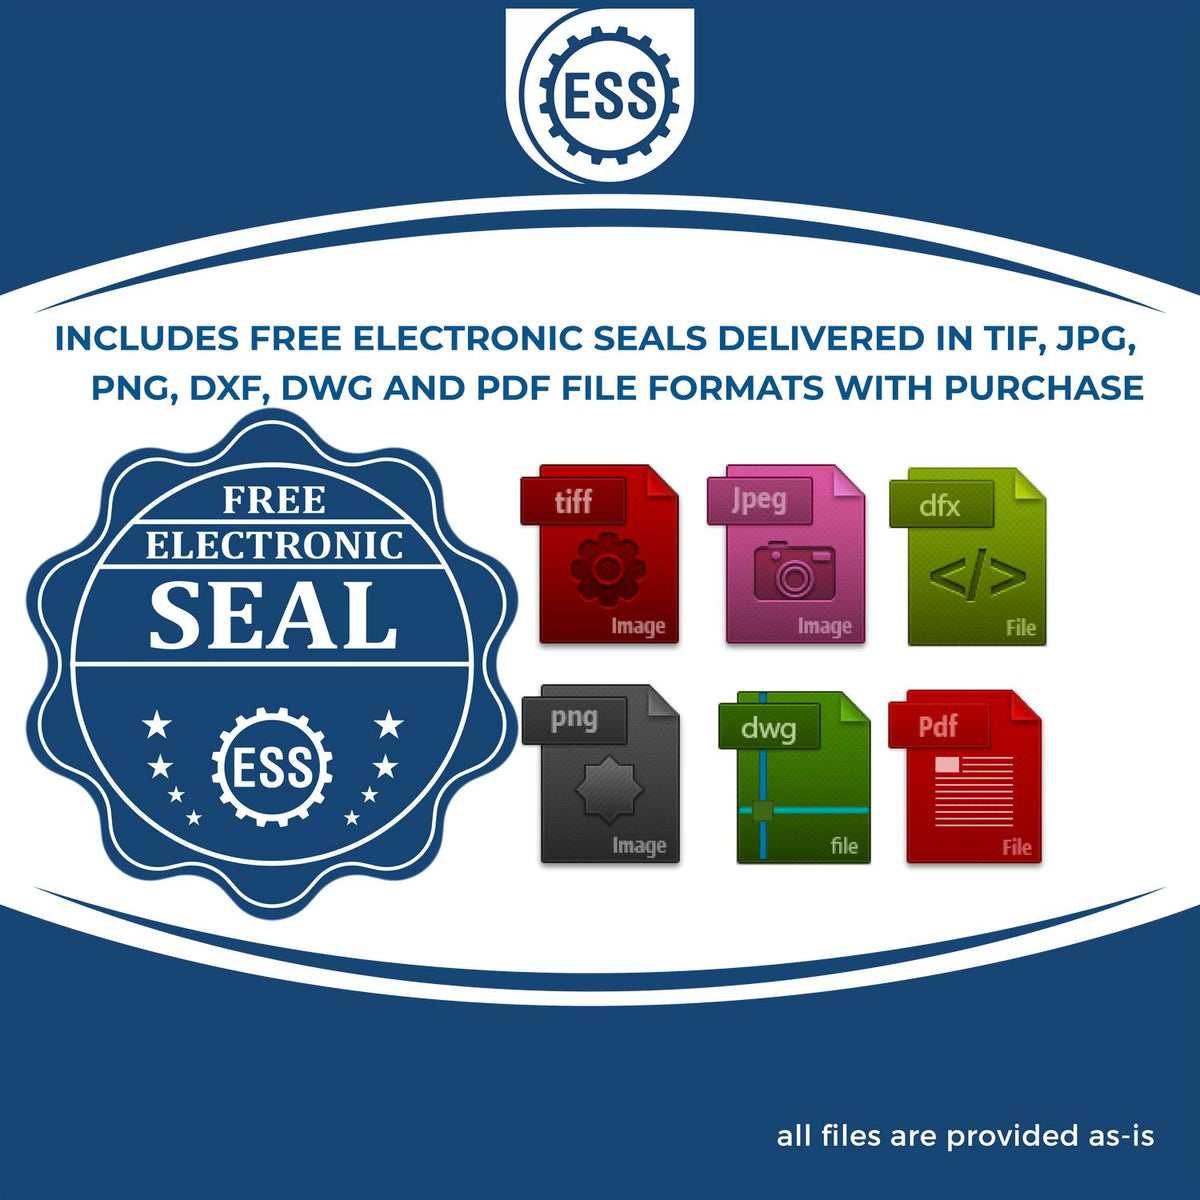 An infographic for the free electronic seal for the Hybrid Minnesota Architect Seal illustrating the different file type icons such as DXF, DWG, TIF, JPG and PNG.